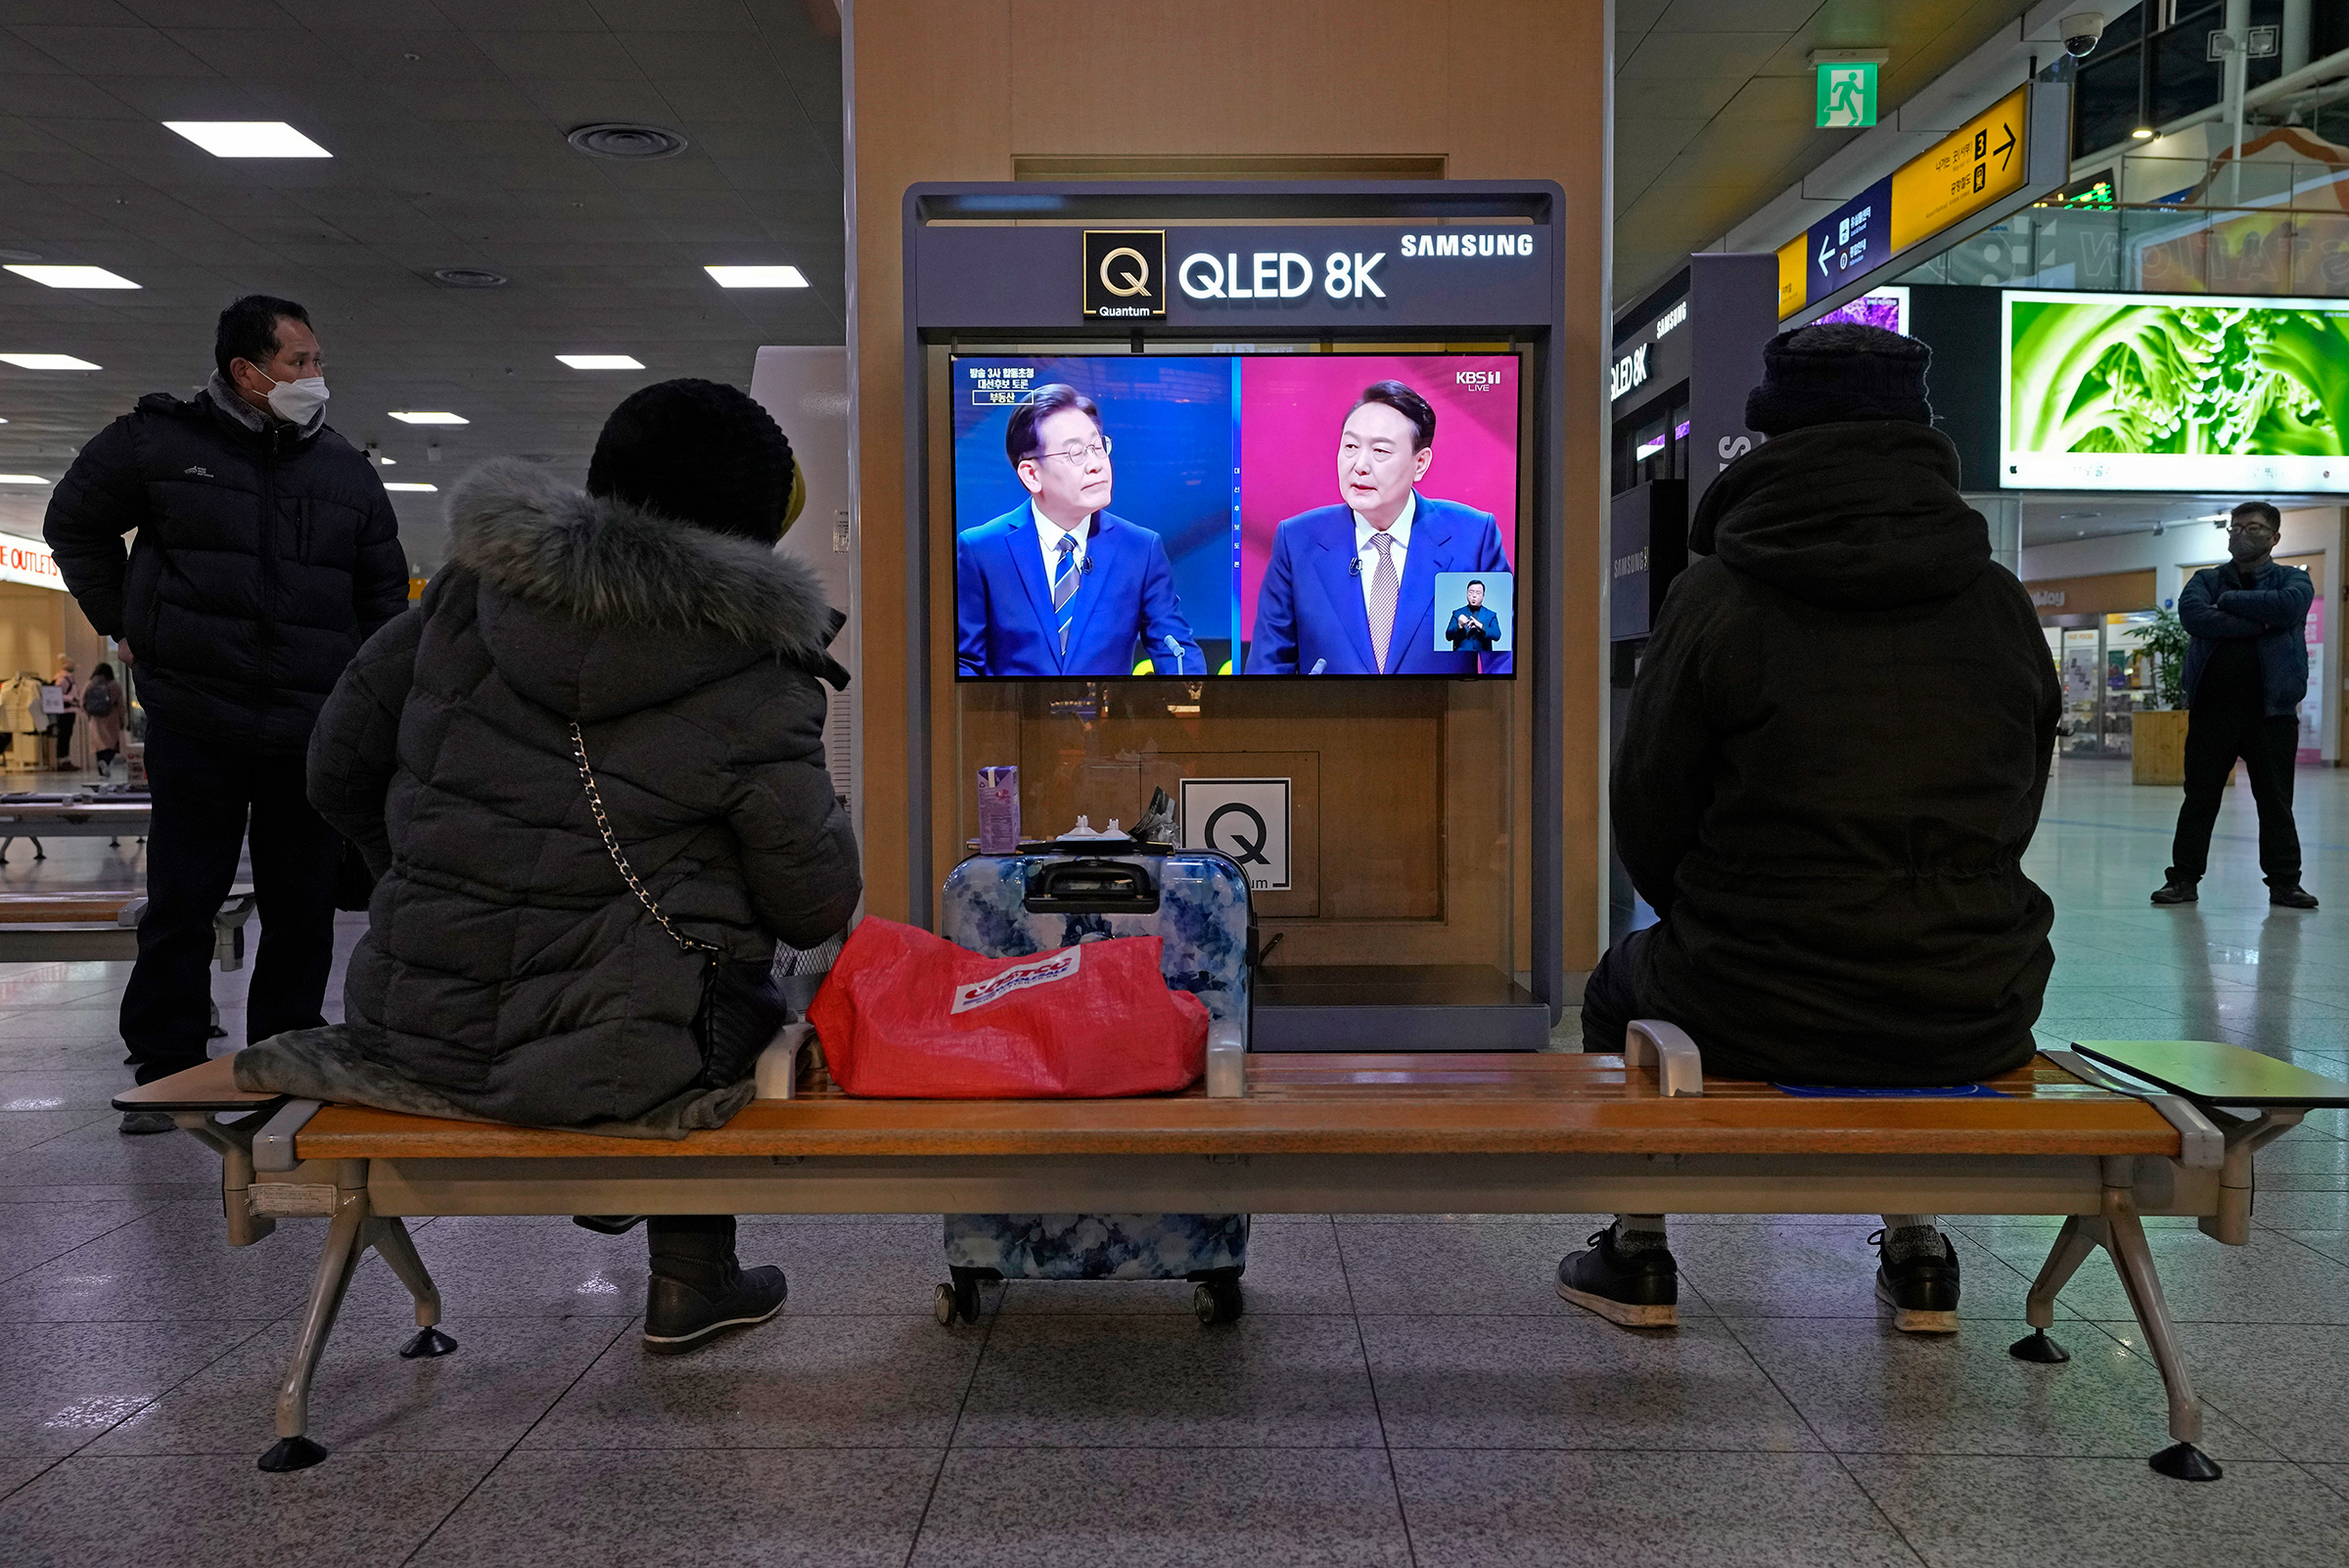 People watch a live broadcast of Lee Jae-myung, of the ruling Democratic Party, and Yoon Suk-yeol, of the main opposition People Power Party during a presidential debate for the upcoming March 9 presidential election at the Seoul Railway Station on Feb. 3 (Ahn Young-joon—AP)